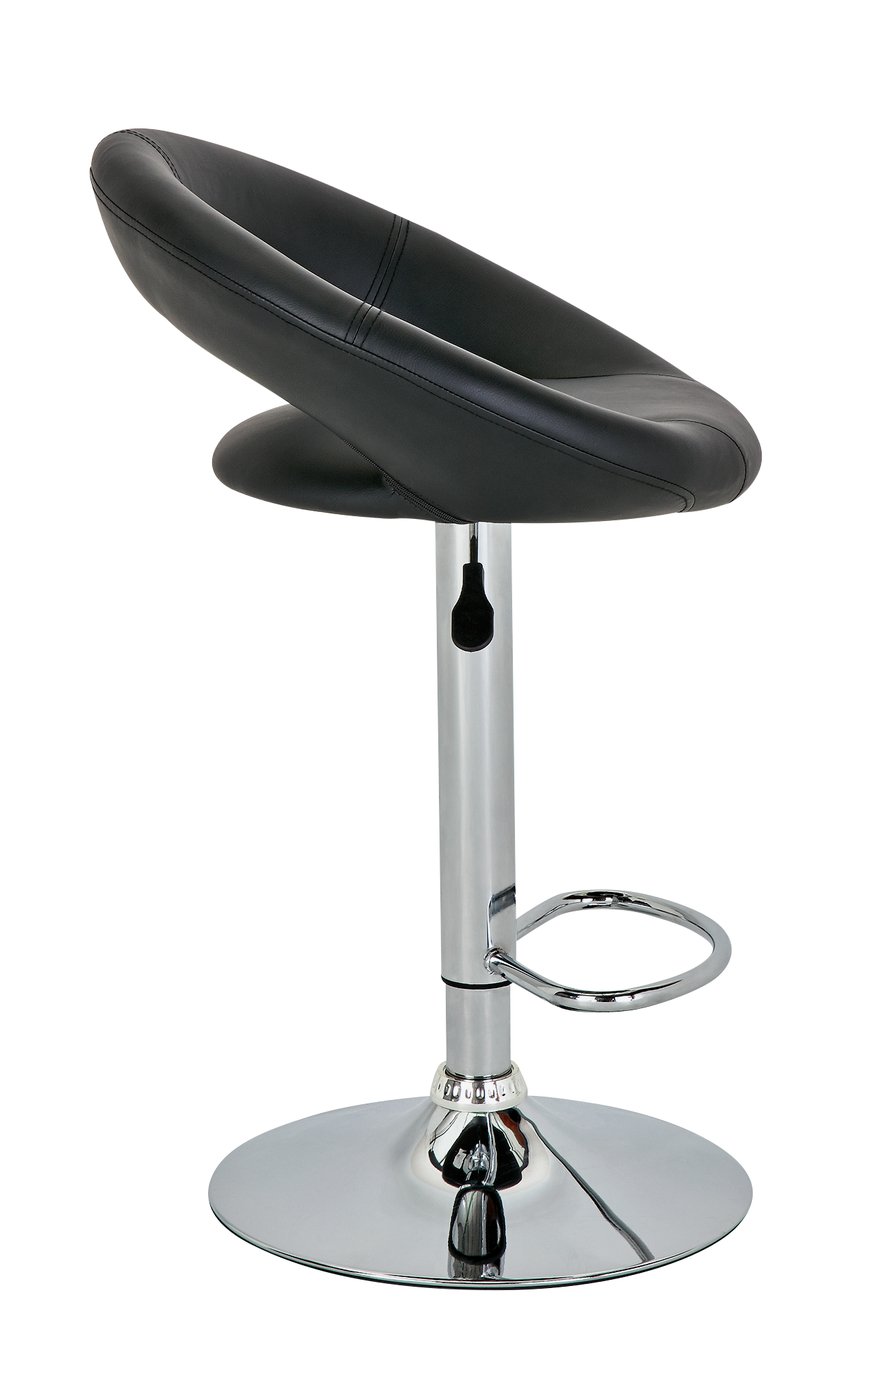 Argos Home Huxley Leather Effect Bar Stool Review